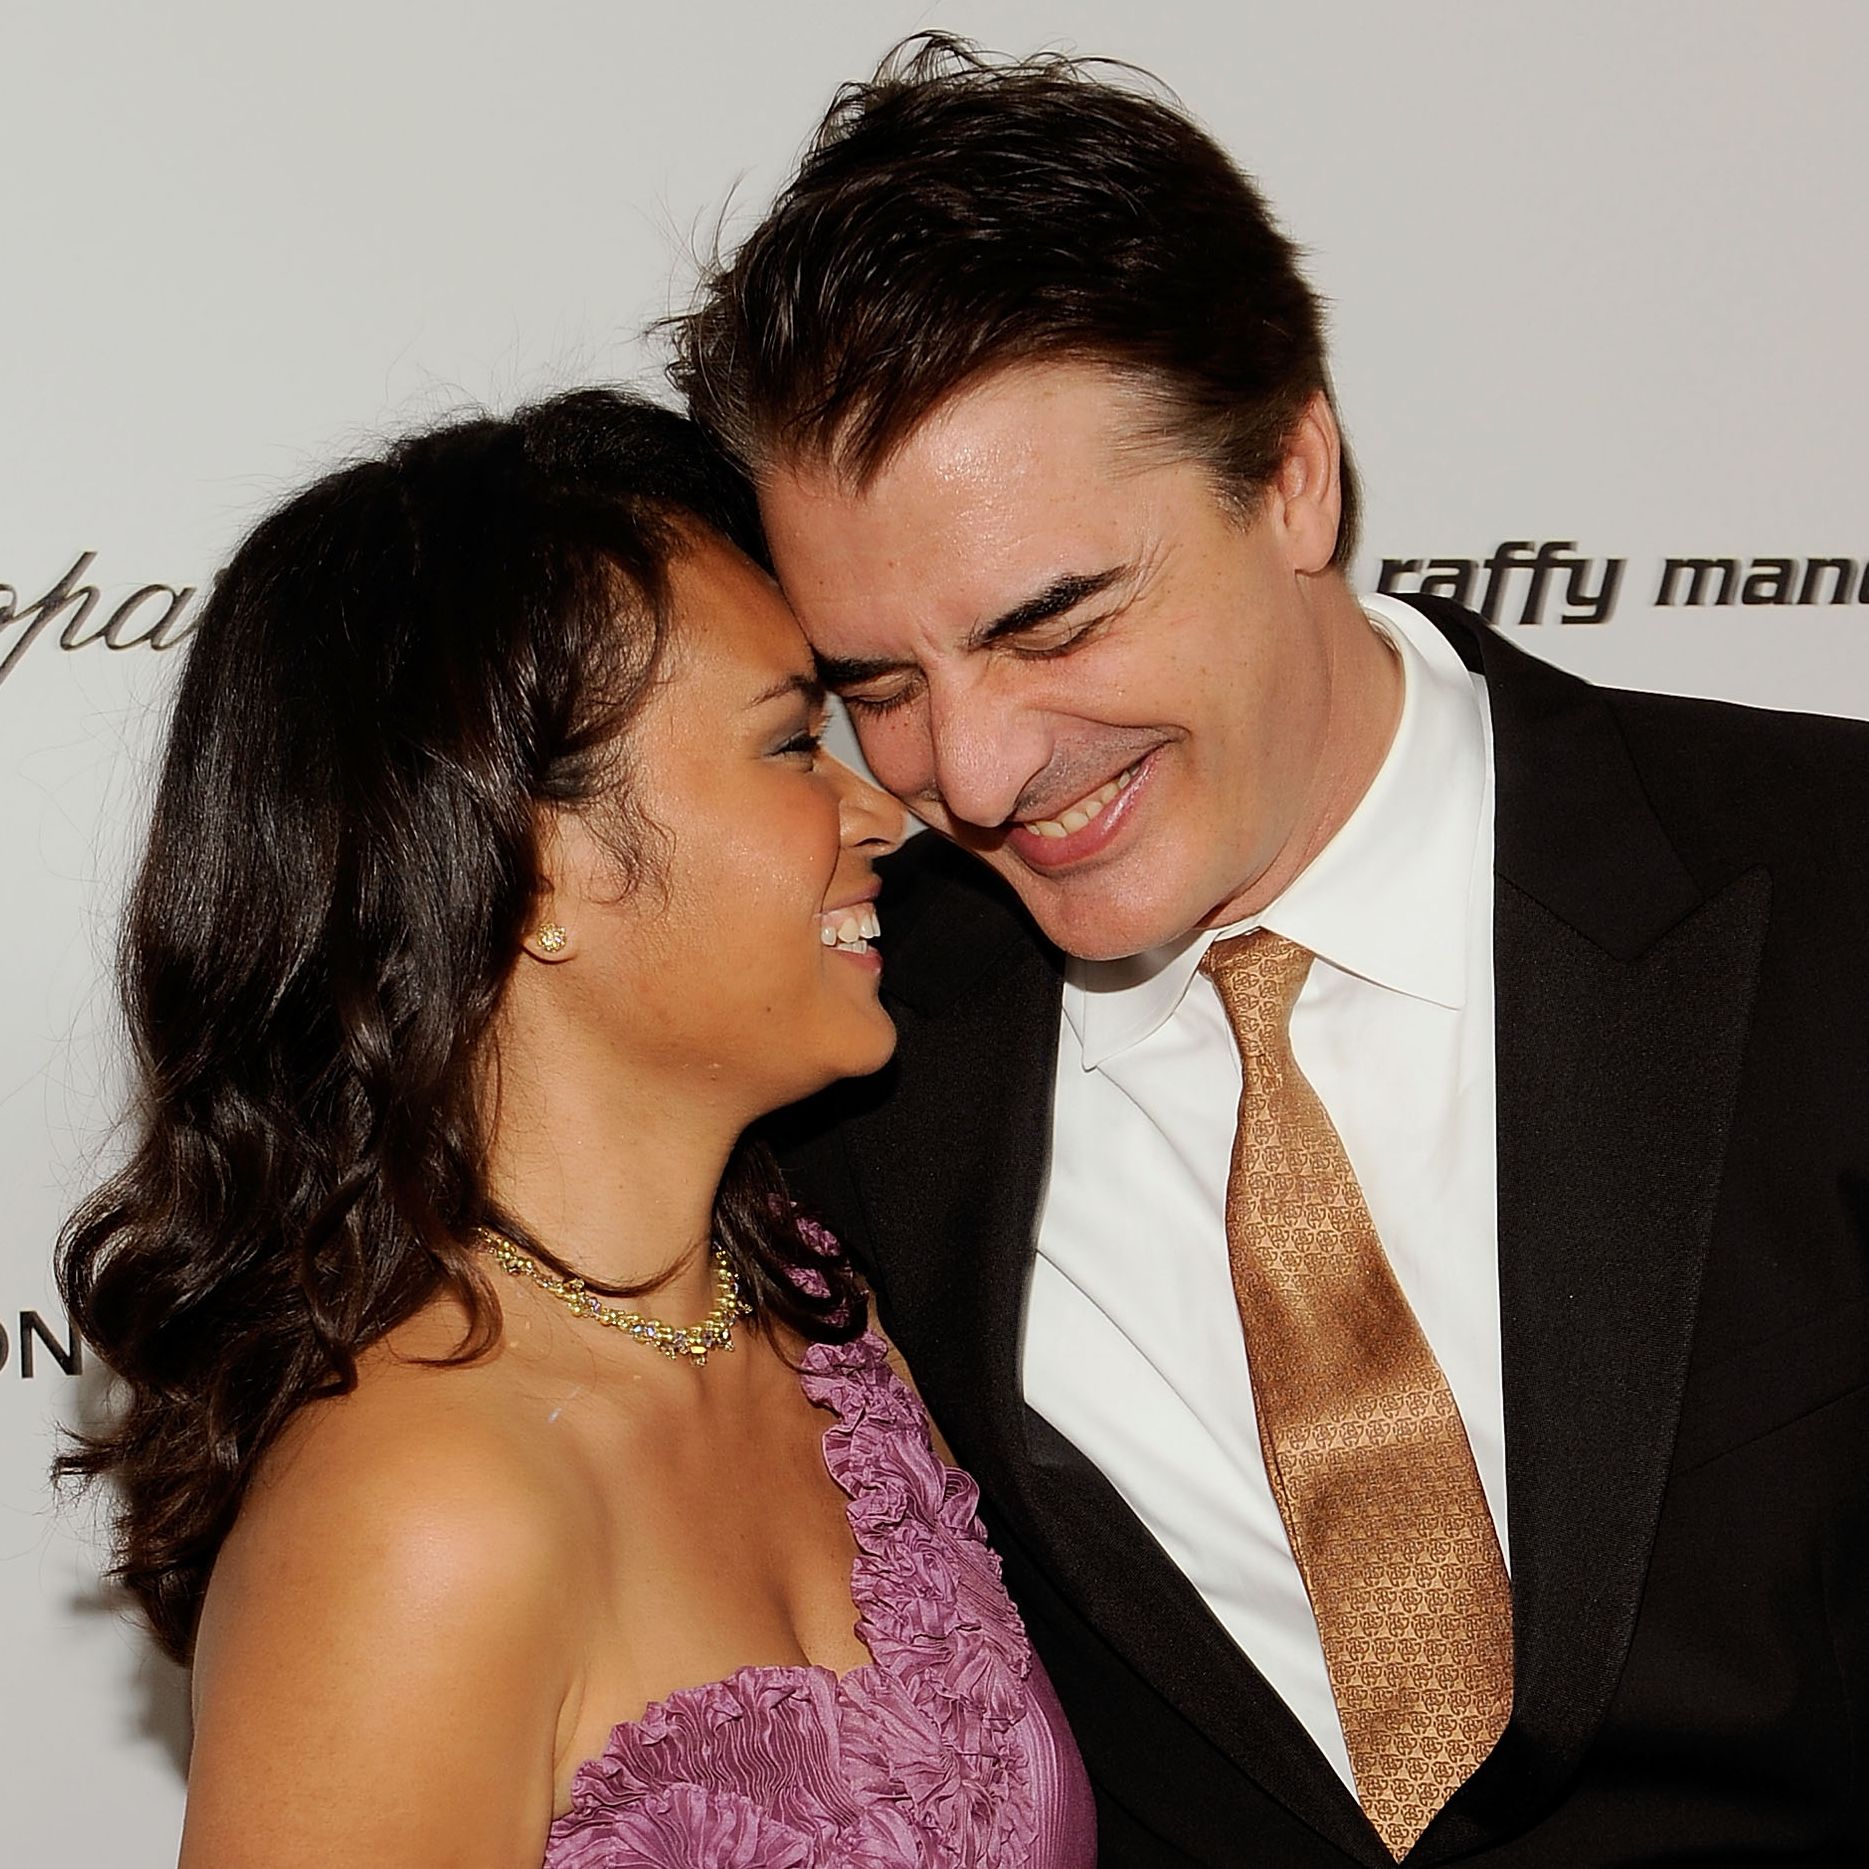 Chris Noth Married